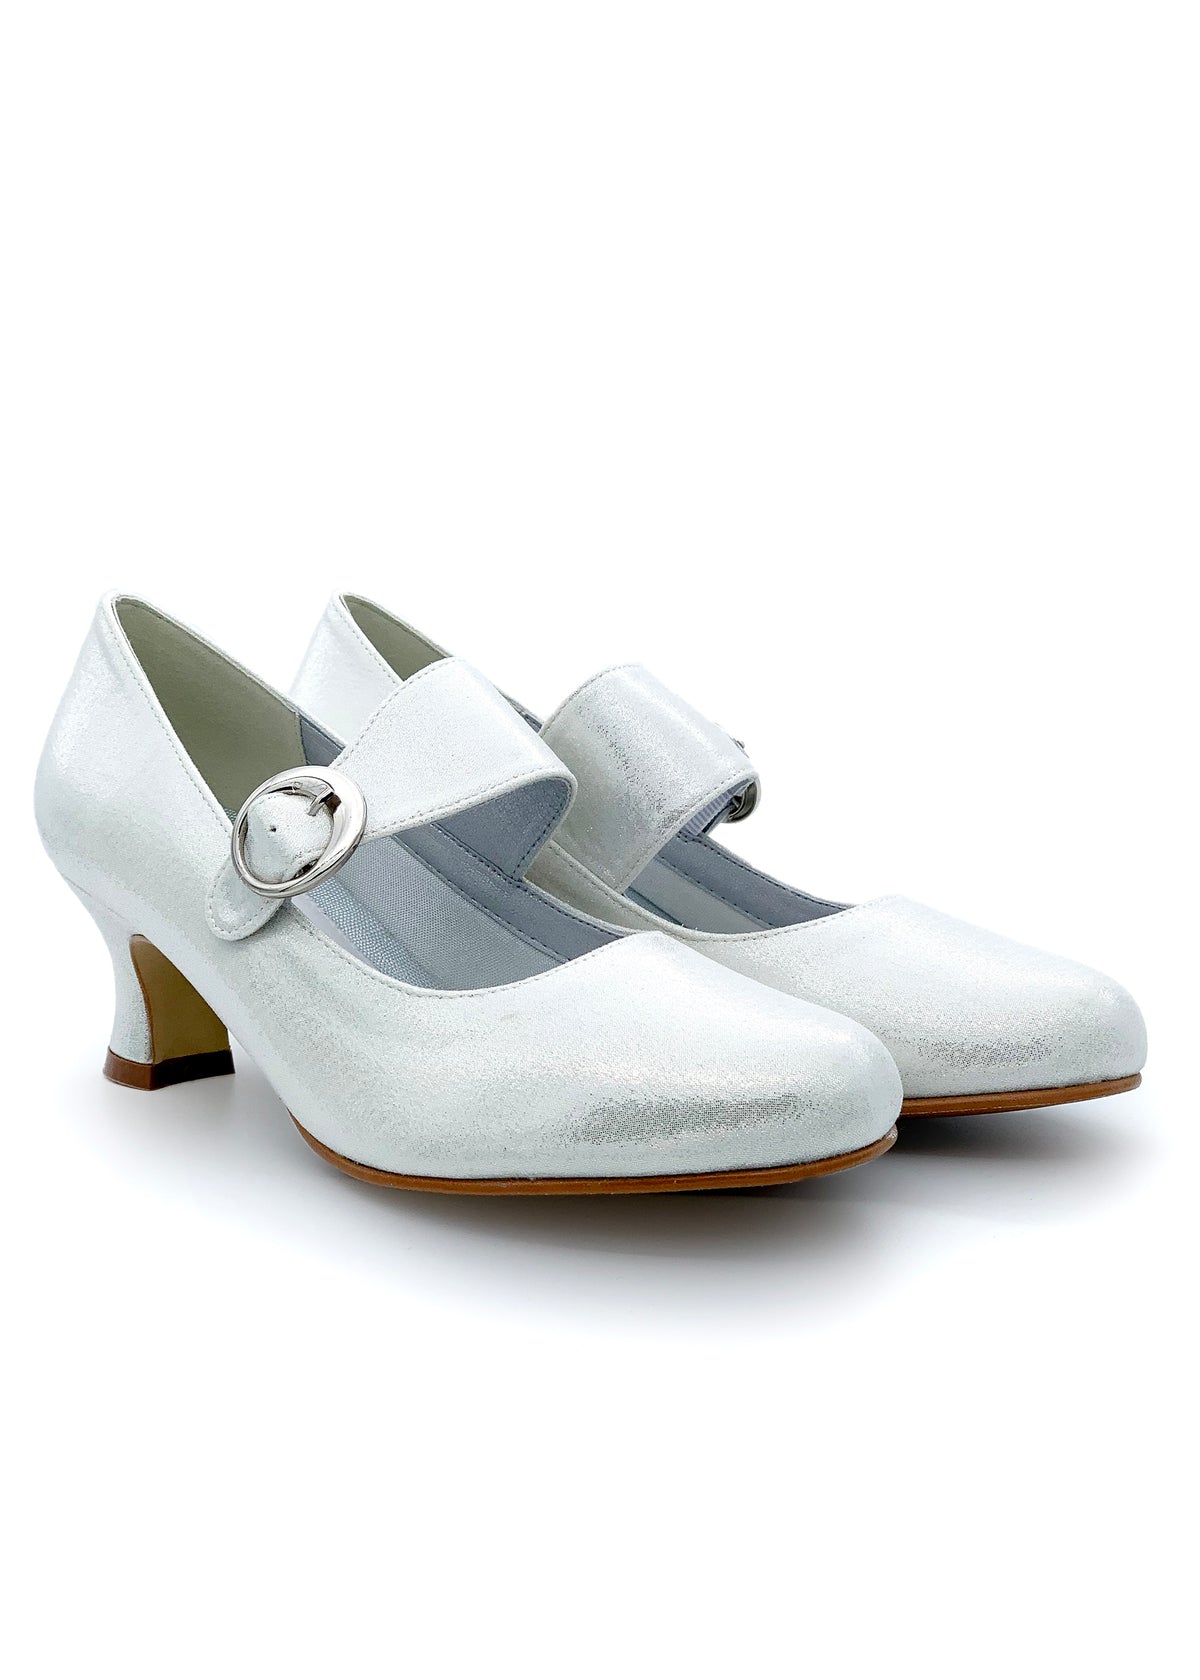 Open toe shoes with wide buckle straps - white, silvery fabric